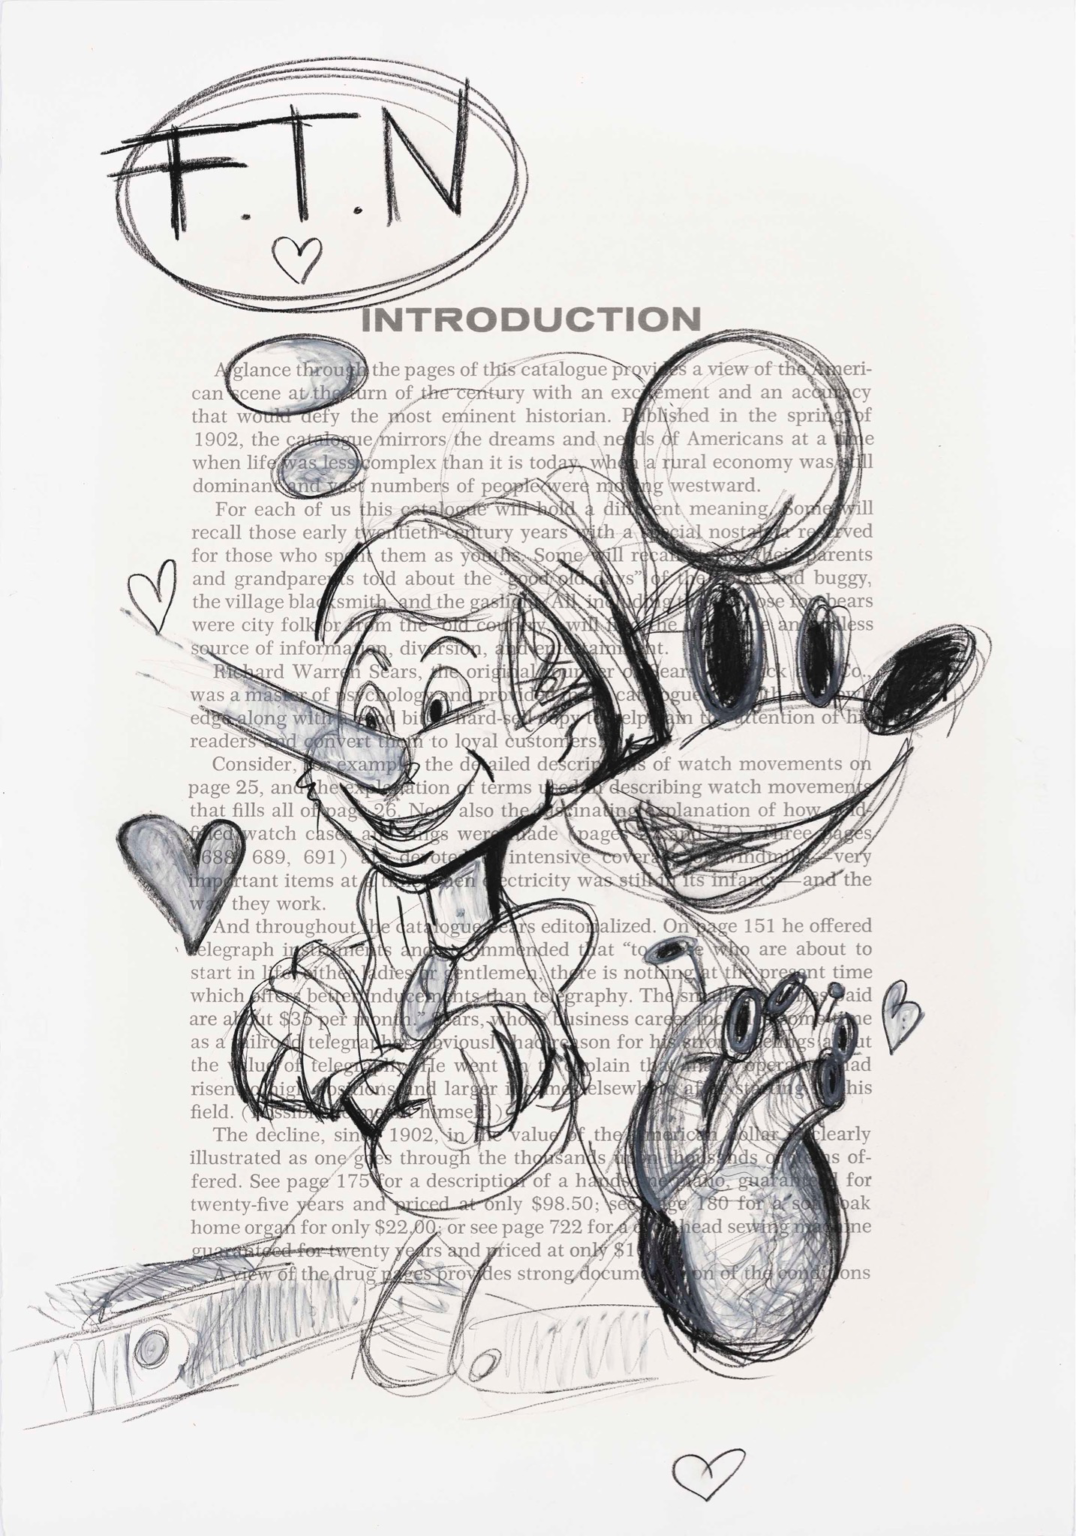 Pinocchio and the human heart